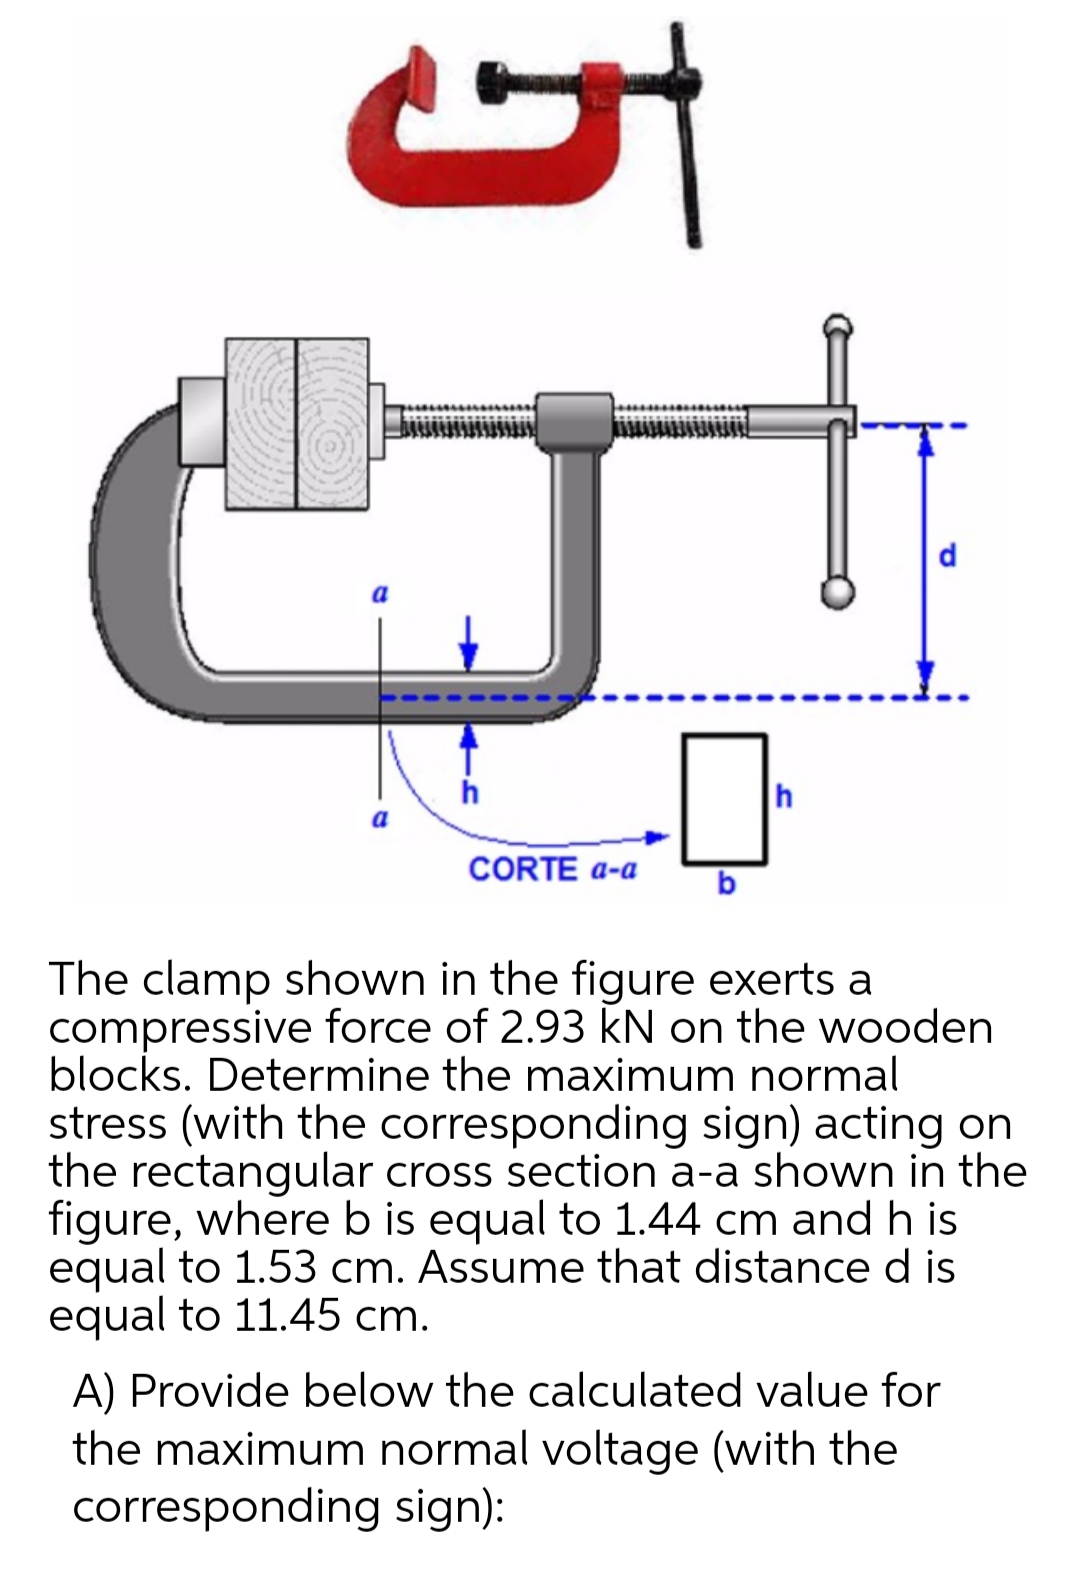 d
h
h
a
CORTE a-a
b
The clamp shown in the figure exerts a
compressive force of 2.93 kN on the wooden
blocks. Determine the maximum normal
stress (with the corresponding sign) acting on
the rectangular cross section a-a shown in the
figure, where b is equal to 1.44 cm and h is
equal to 1.53 cm. Assume that distance d is
equal to 11.45 cm.
A) Provide below the calculated value for
the maximum normal voltage (with the
corresponding sign):
